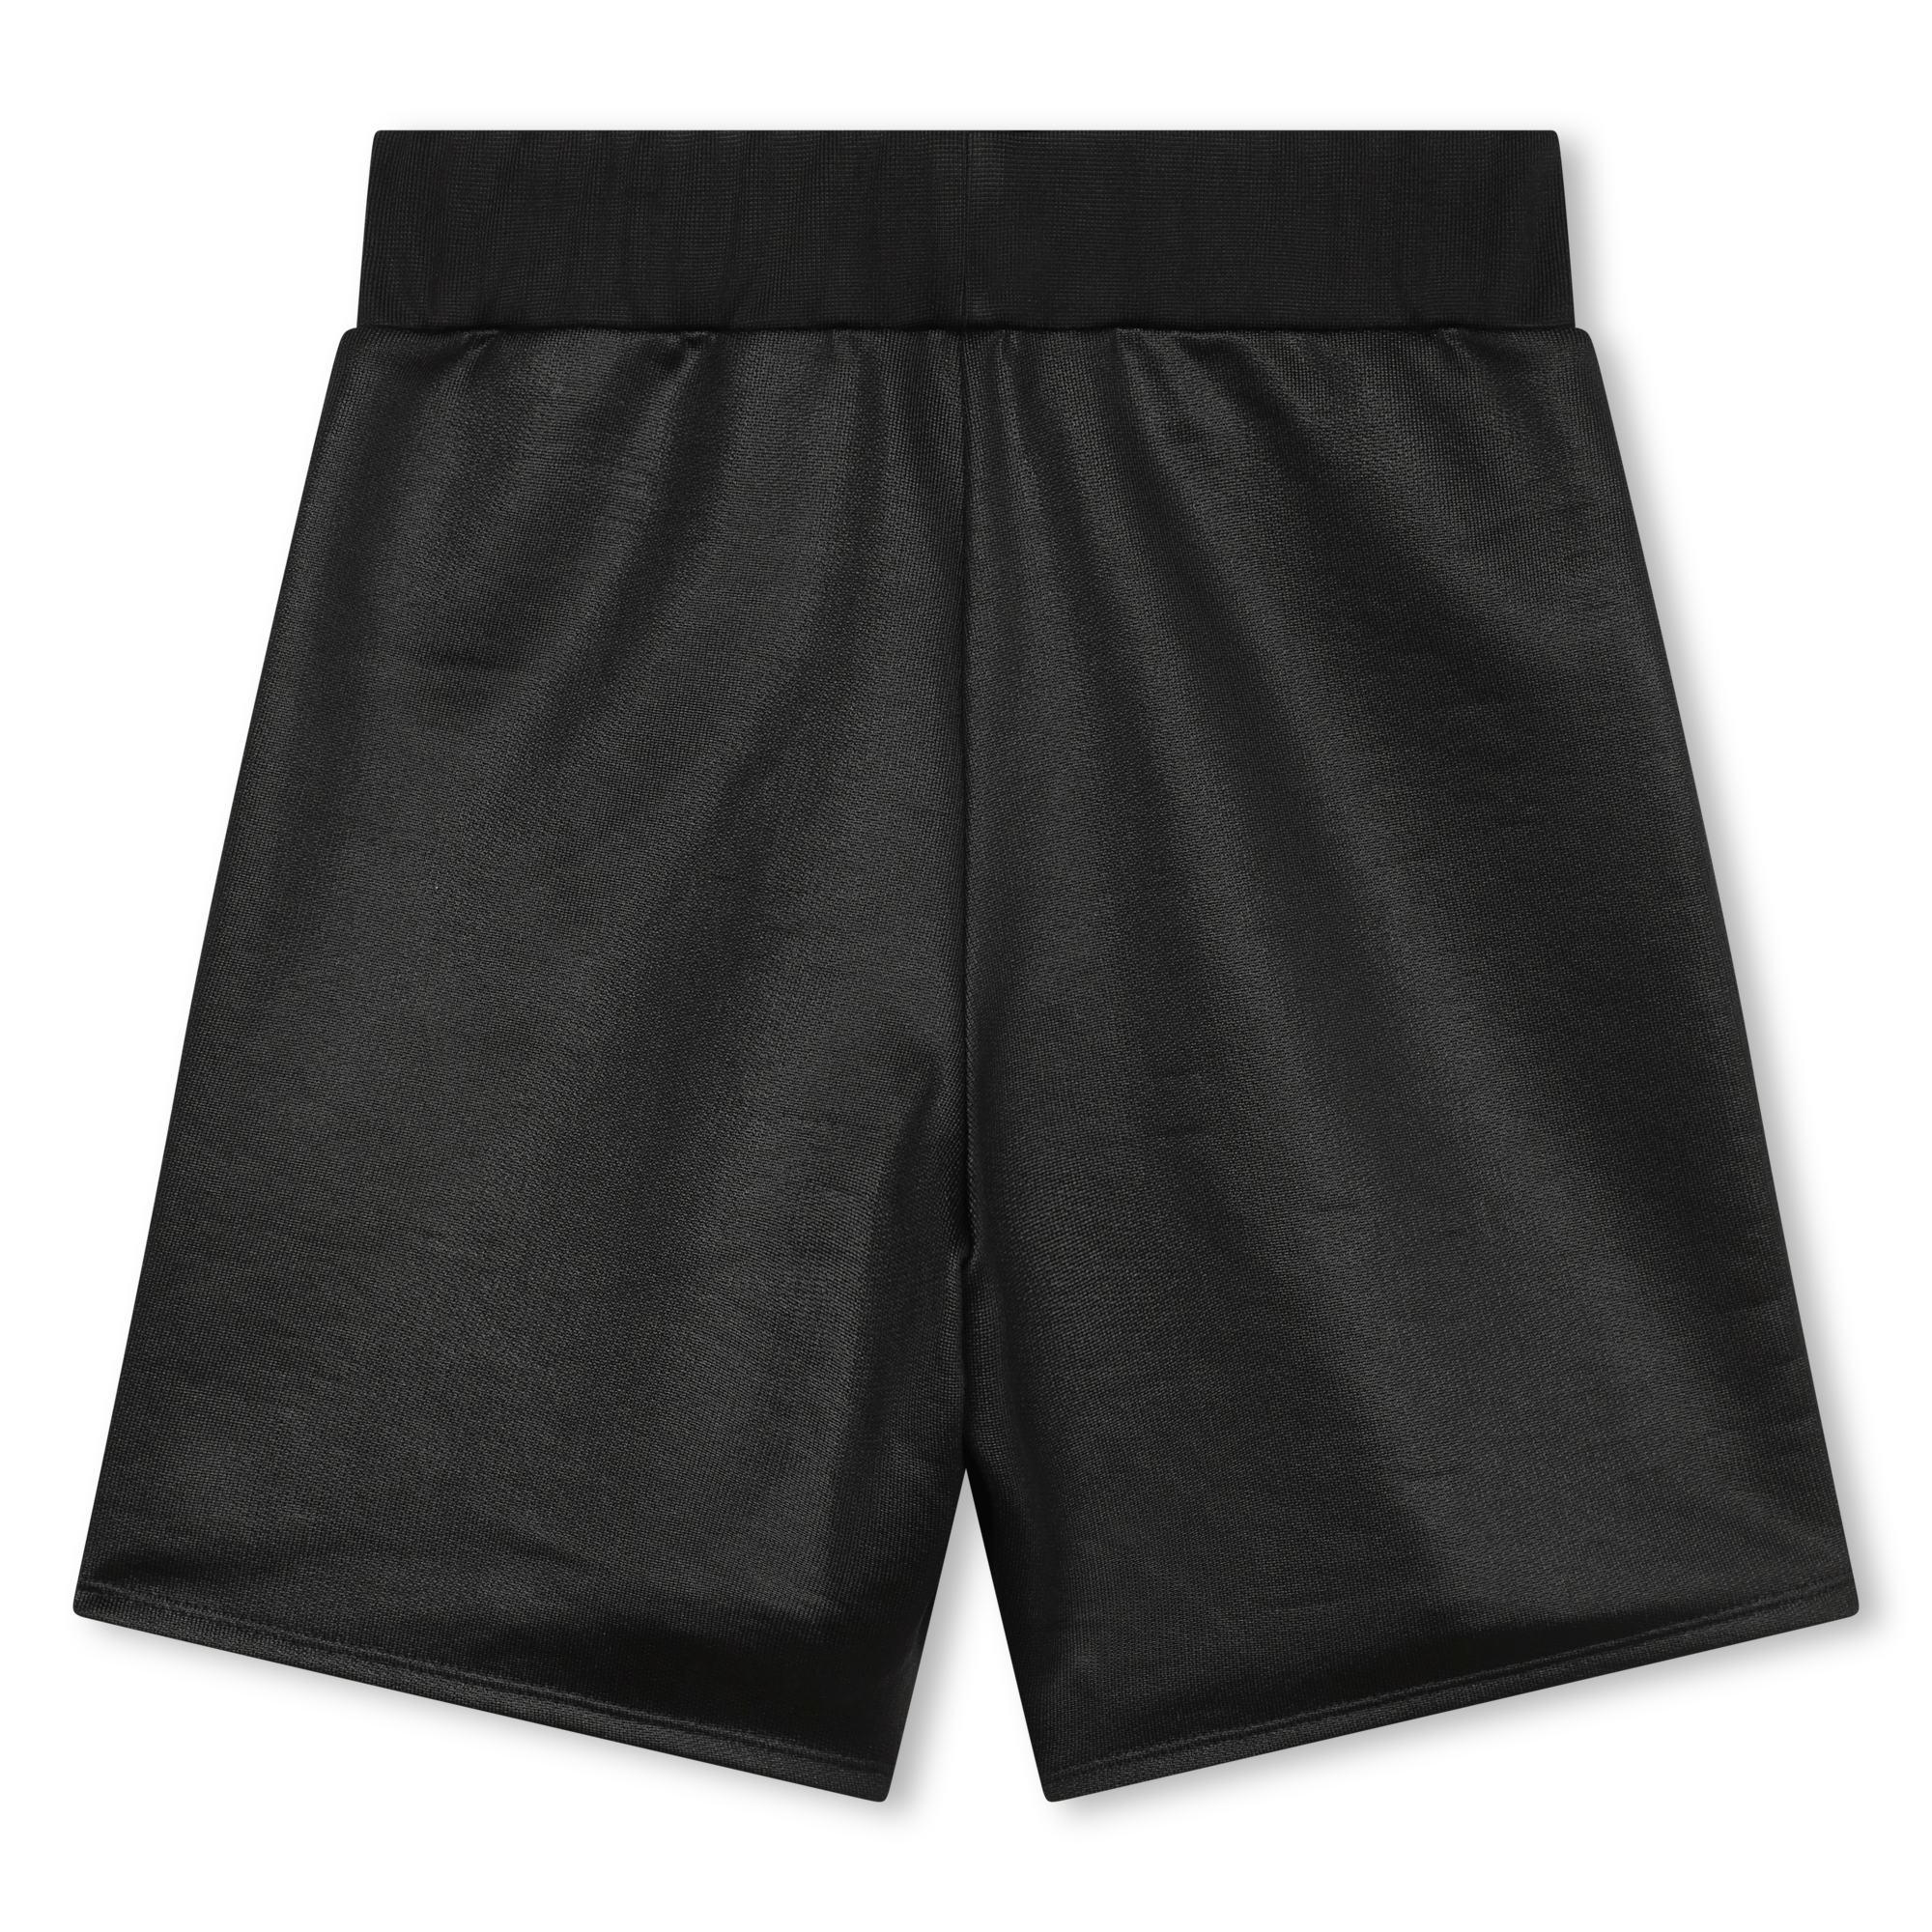 Two-toned unisex Bermudas DKNY for UNISEX